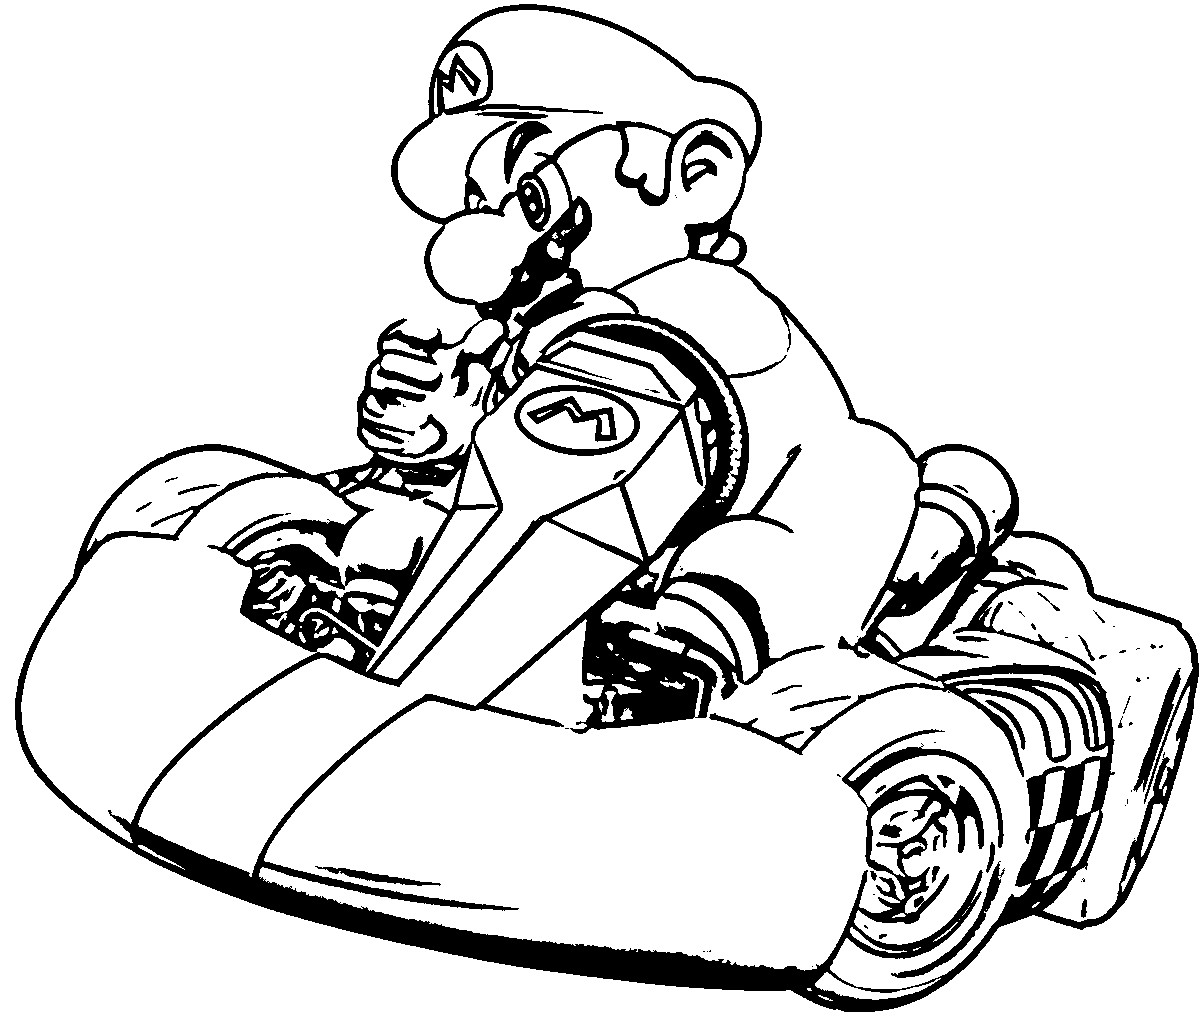 Mario Kart Coloring Pages
 Mario Kart 8 Coloring Pages Coloring Home